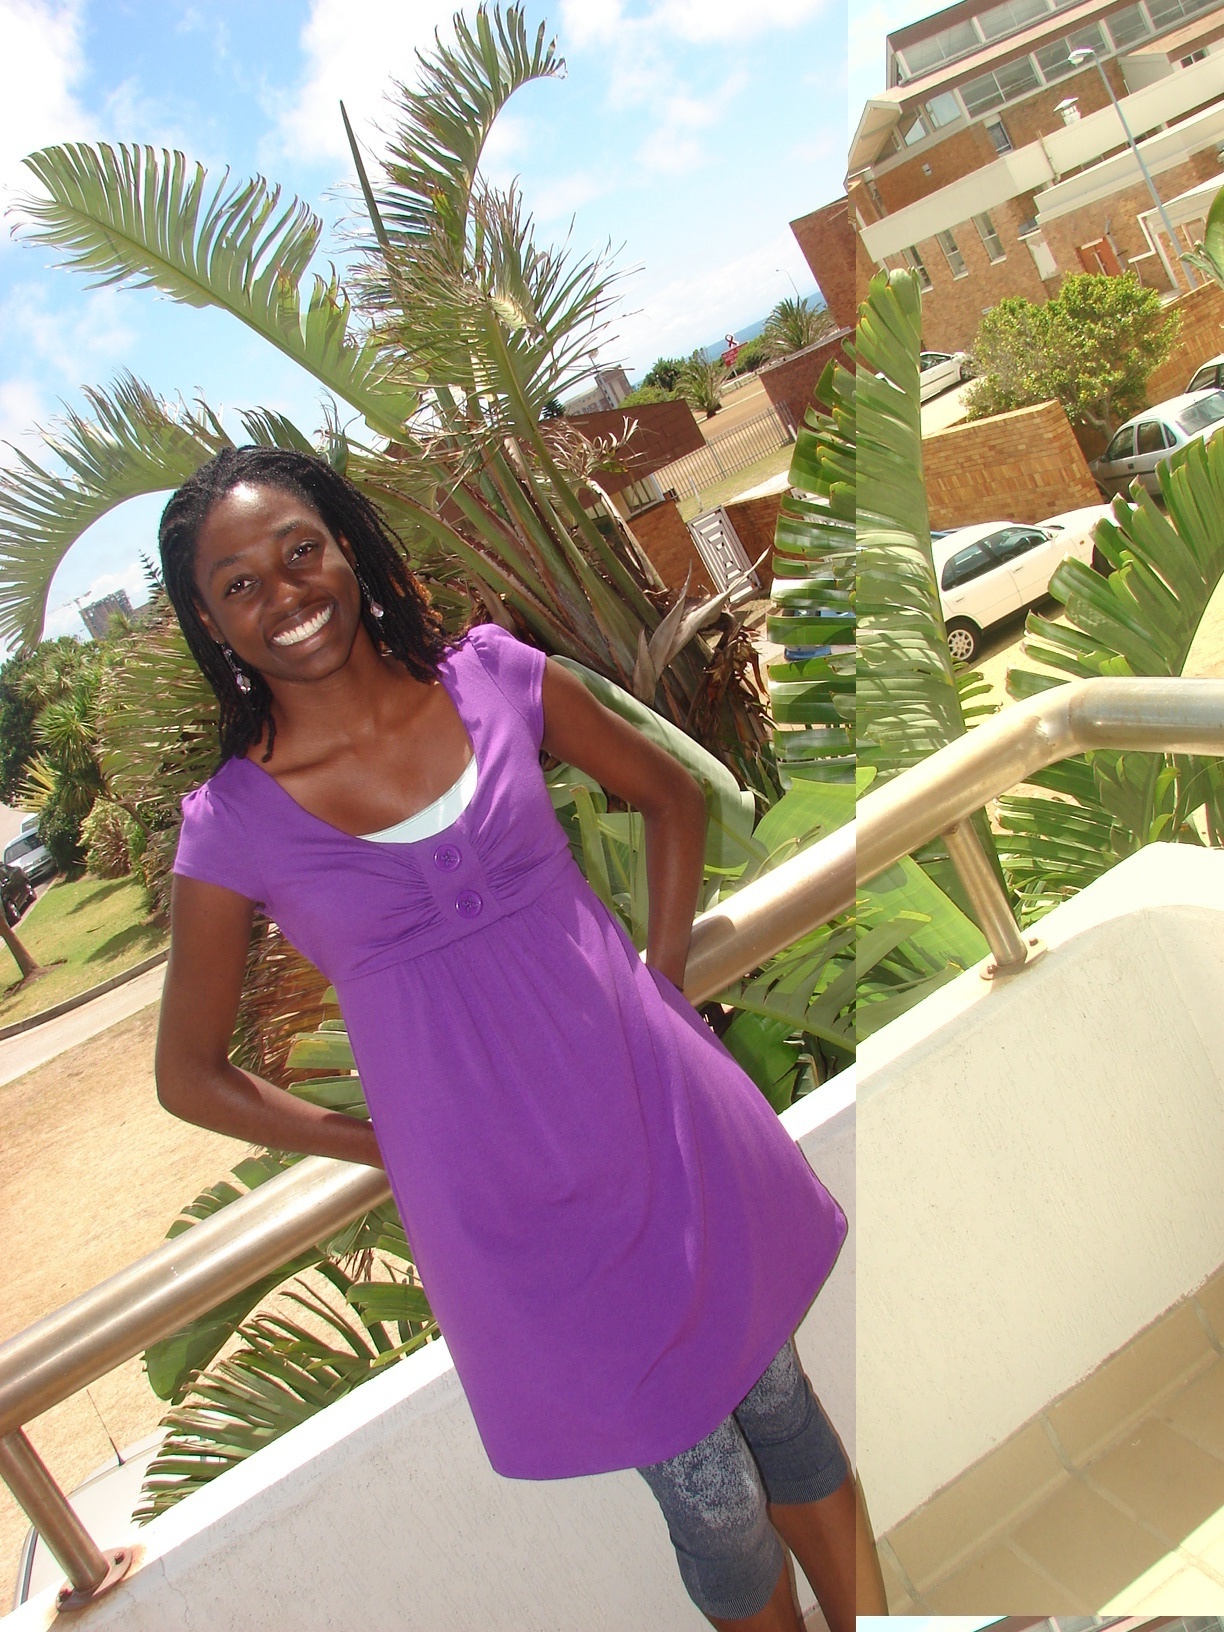 Gayon (from Jamaica) '... the great refresher of my teaching career... I'll never forget it or the wonderful people I met'